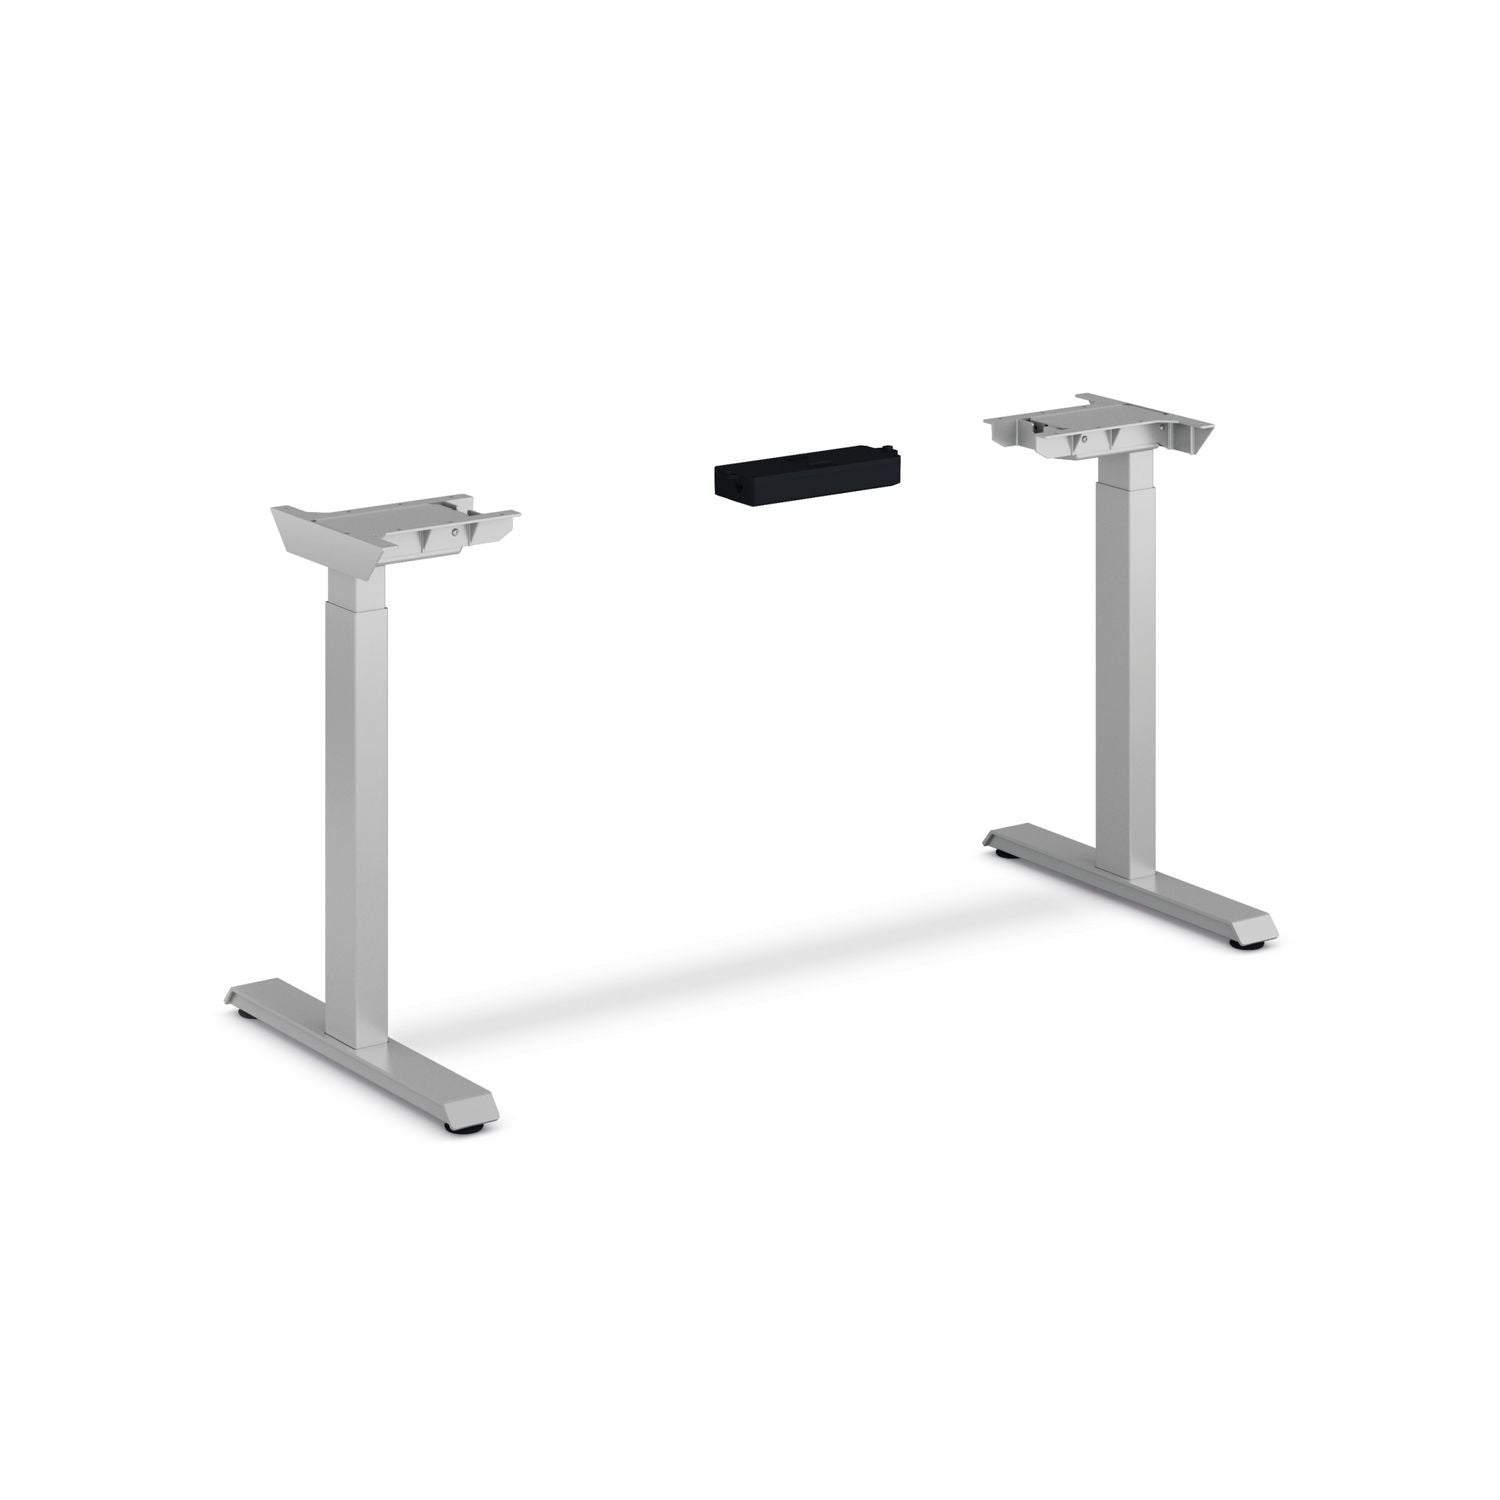 coordinate-height-adjustable-desk-bundle-2-stage-70-x-22-x-2775-to-47-pinnacle\\silver-ships-in-7-10-business-days_honhat2spns2270 - 3